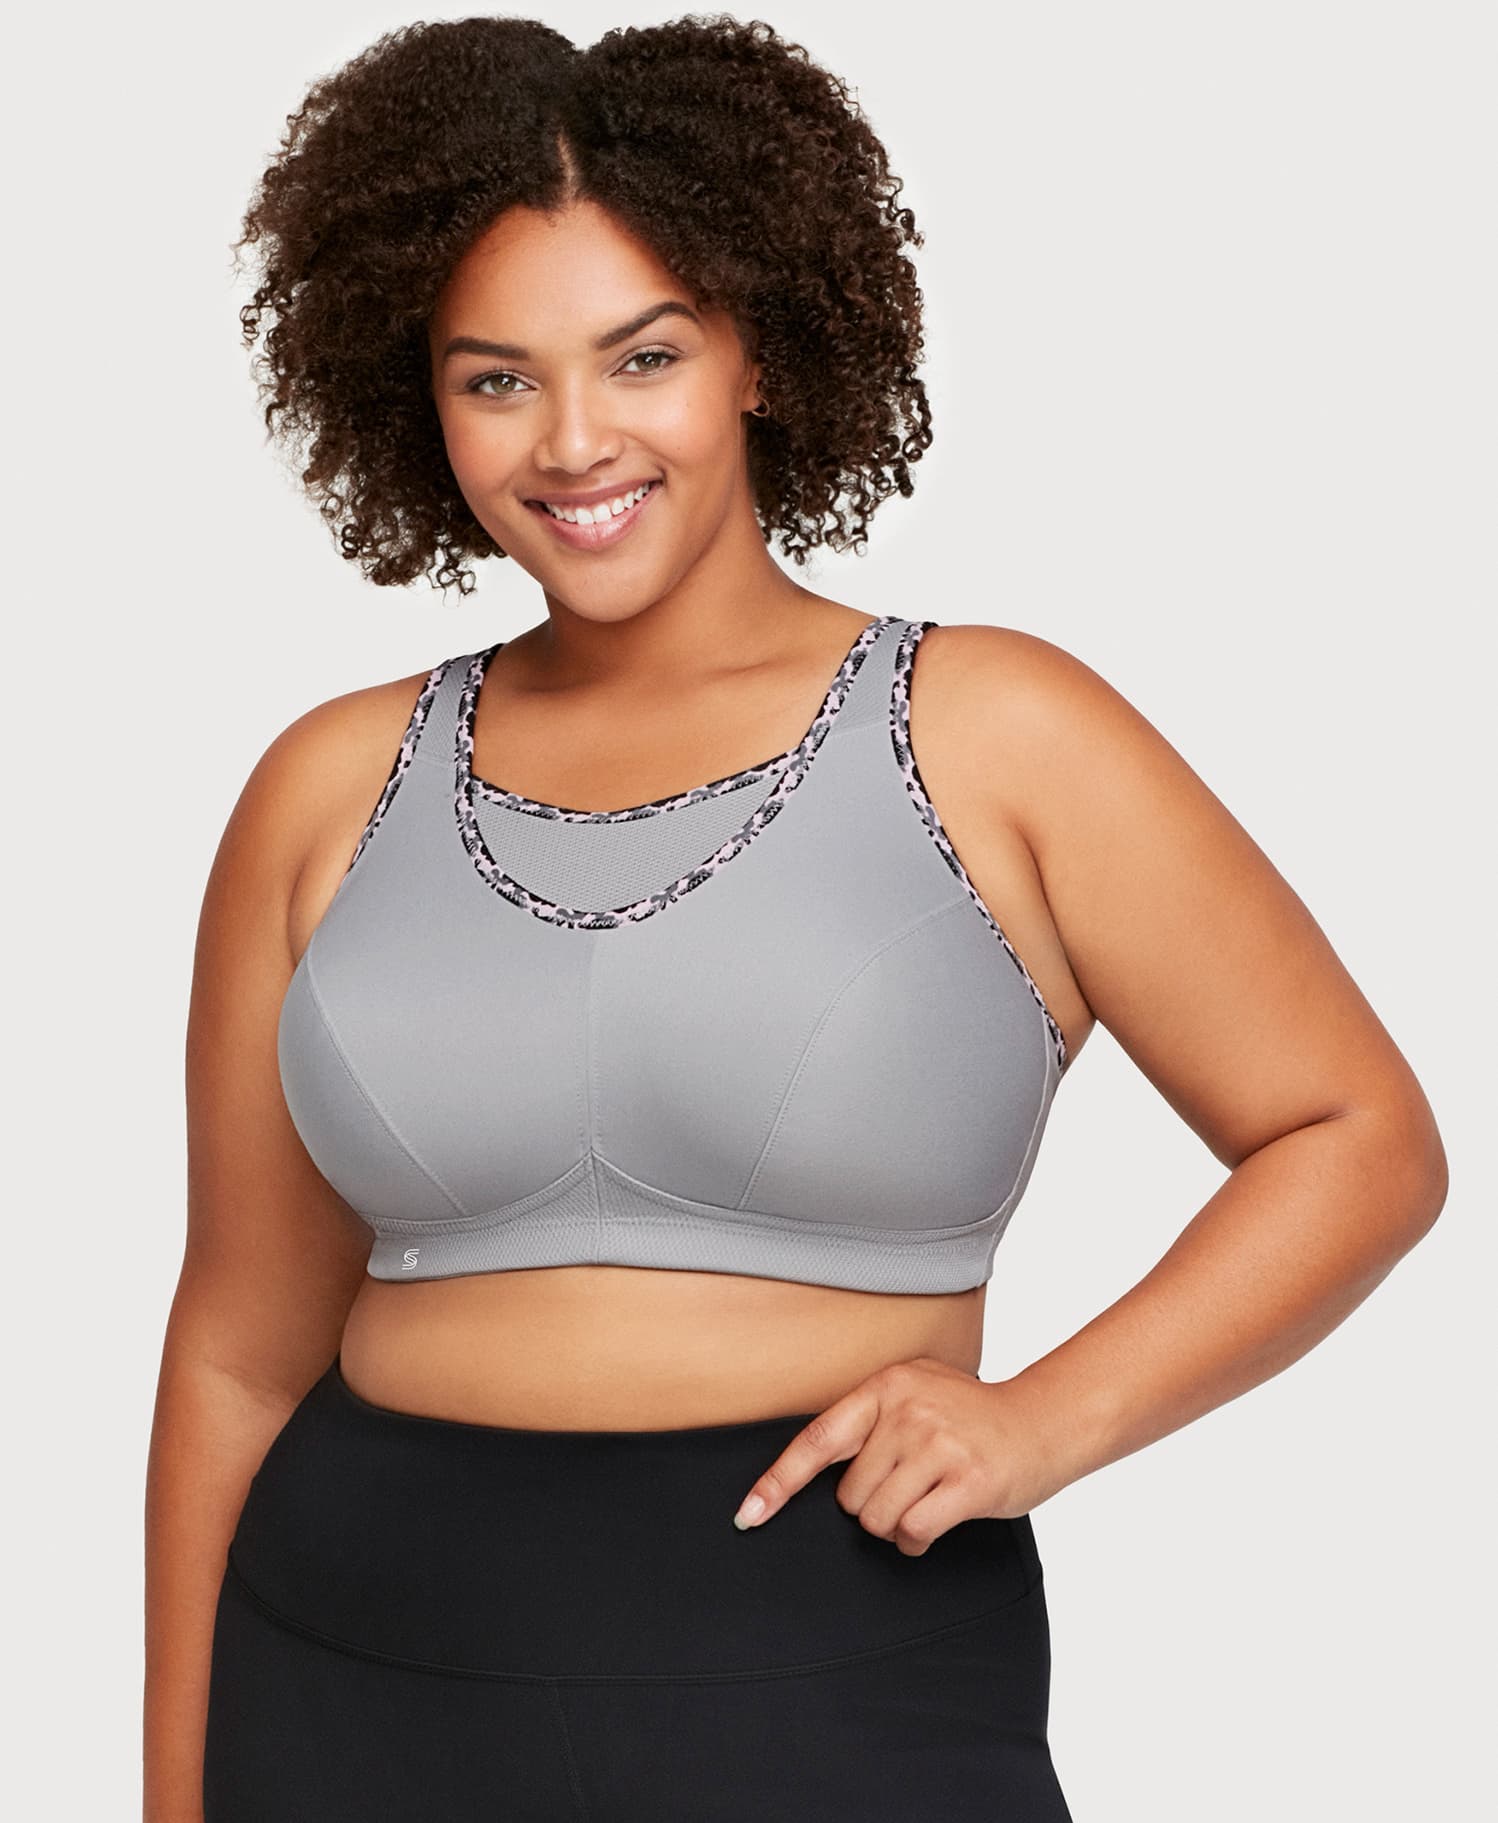 Can I Get A No Bounce Sports Bra Without Underwire? – SportsBra